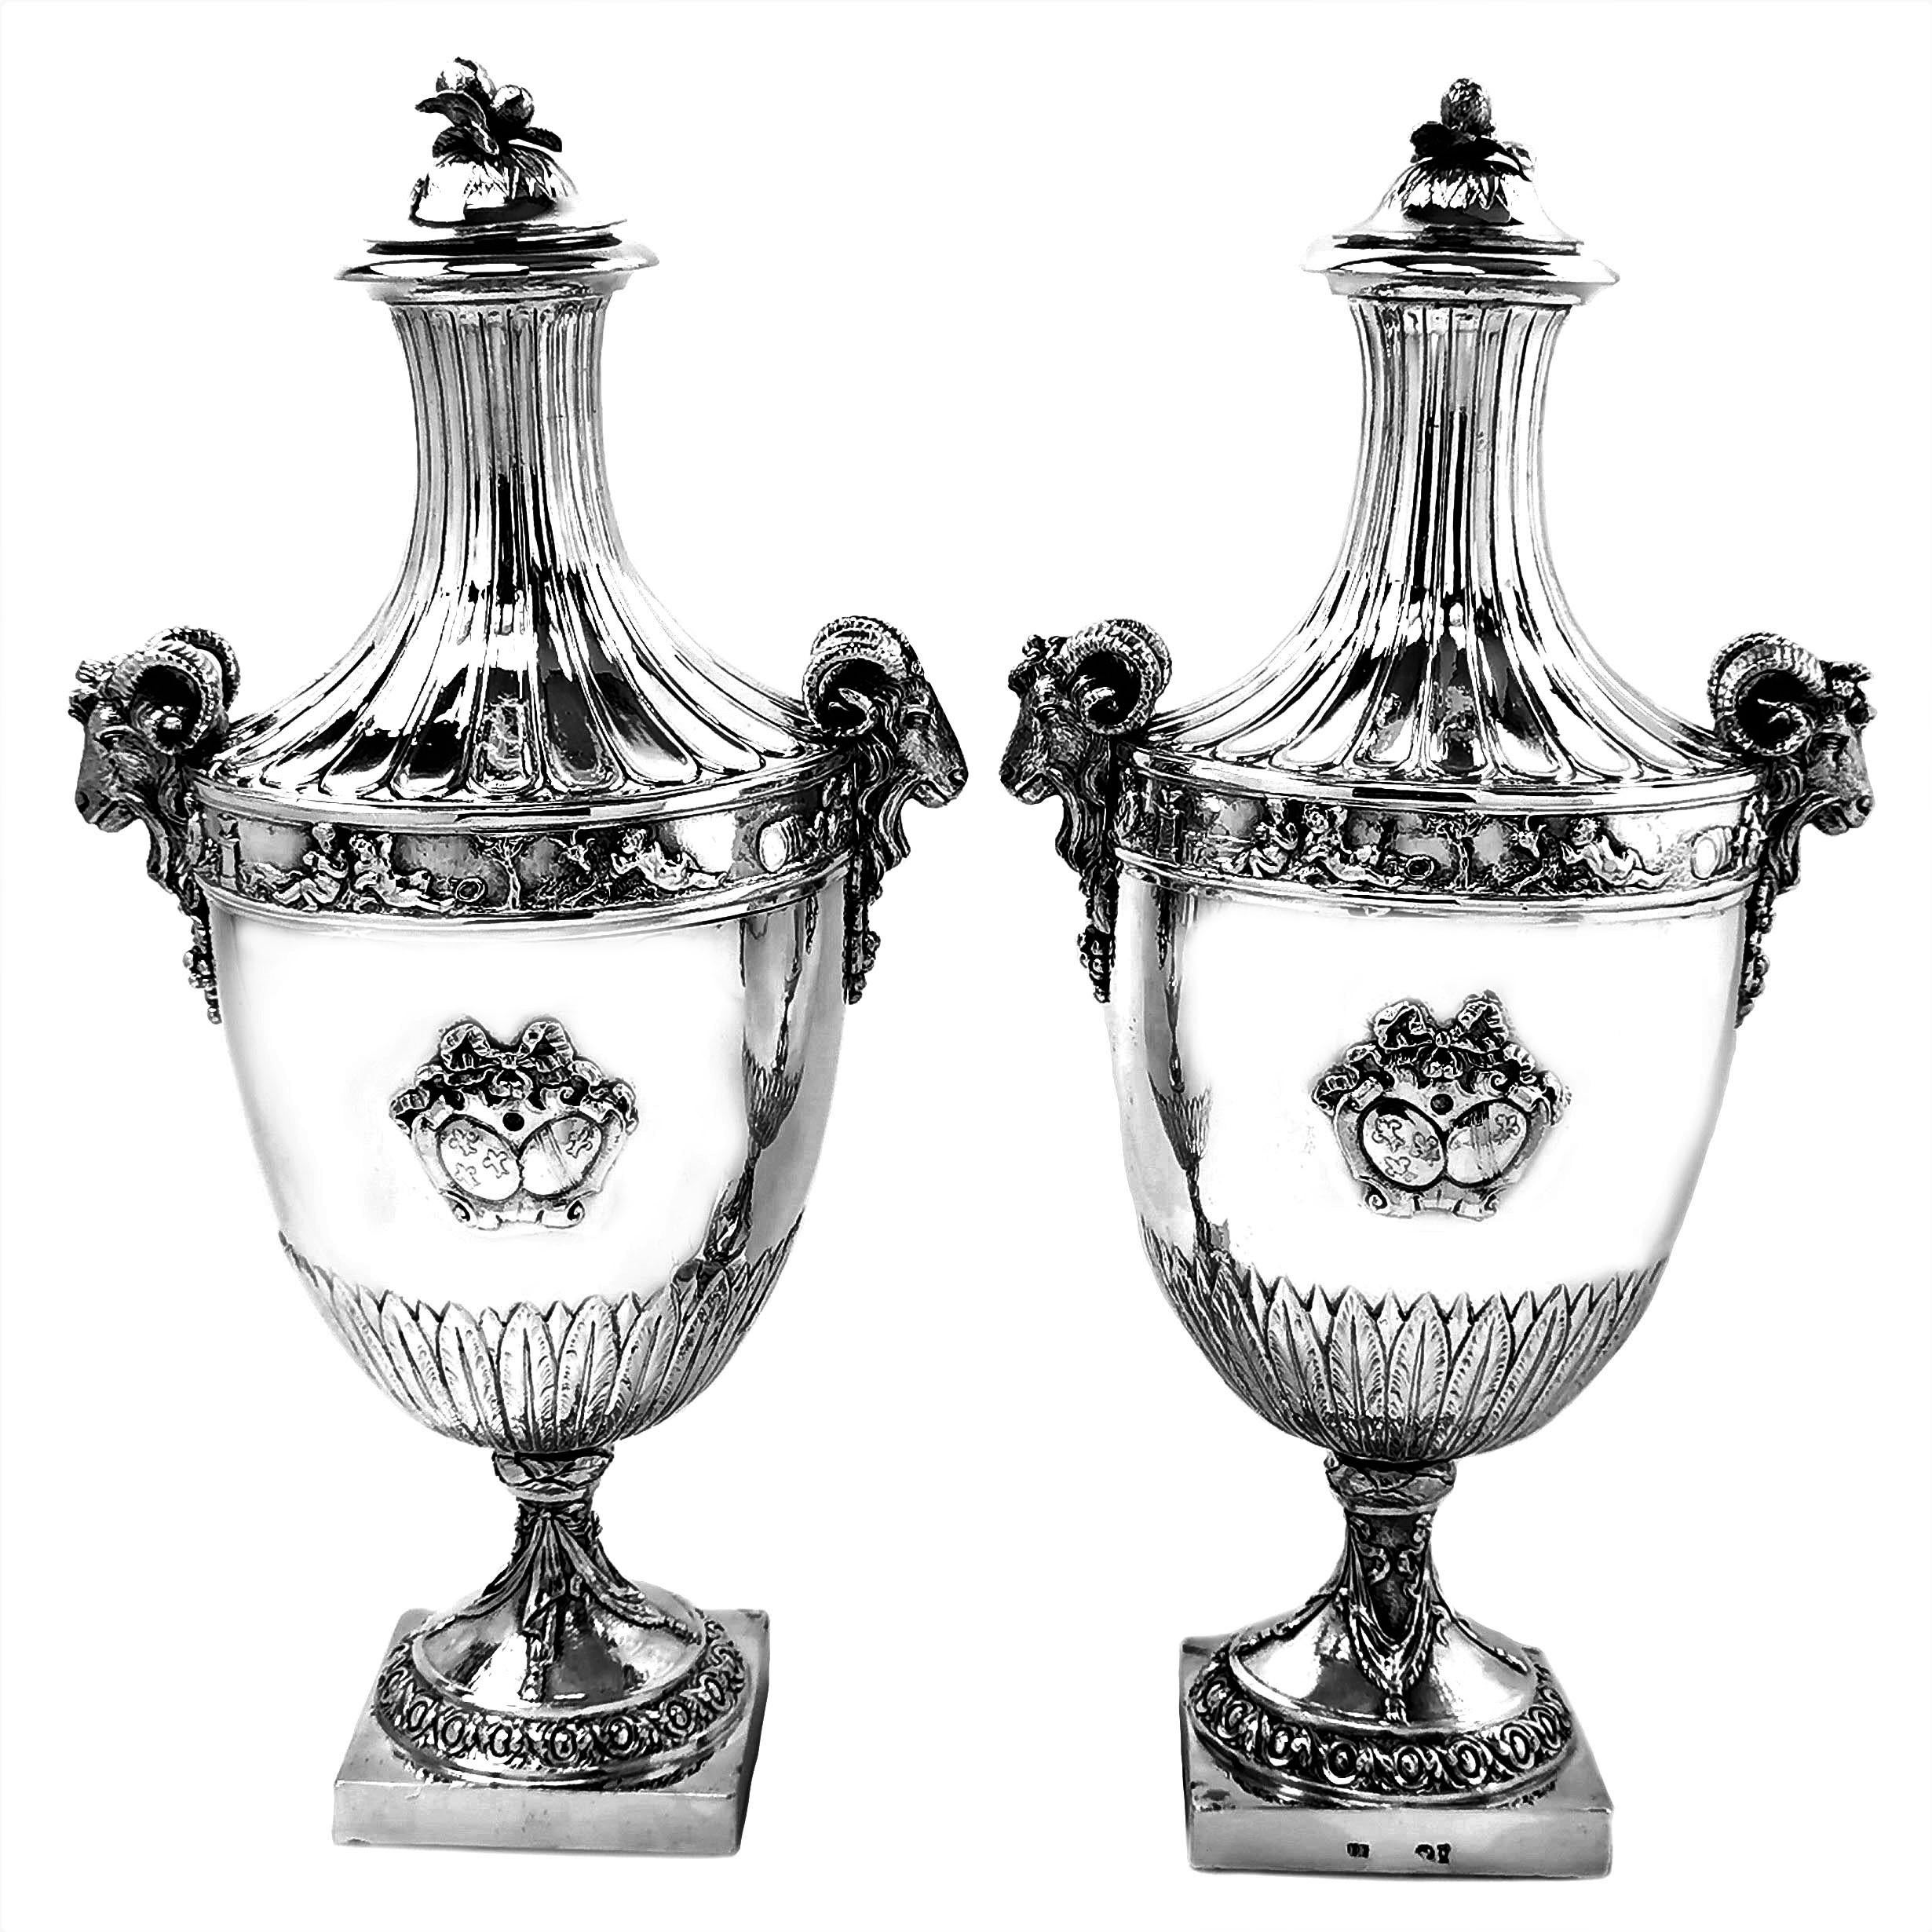 An impressive pair of Antique German solid Silver lidded Vases / Urns on square bases. These Vases are decorated with detailed chased and applied elements including stylized leaves chased around the lower portion of the body. Each Vase has an